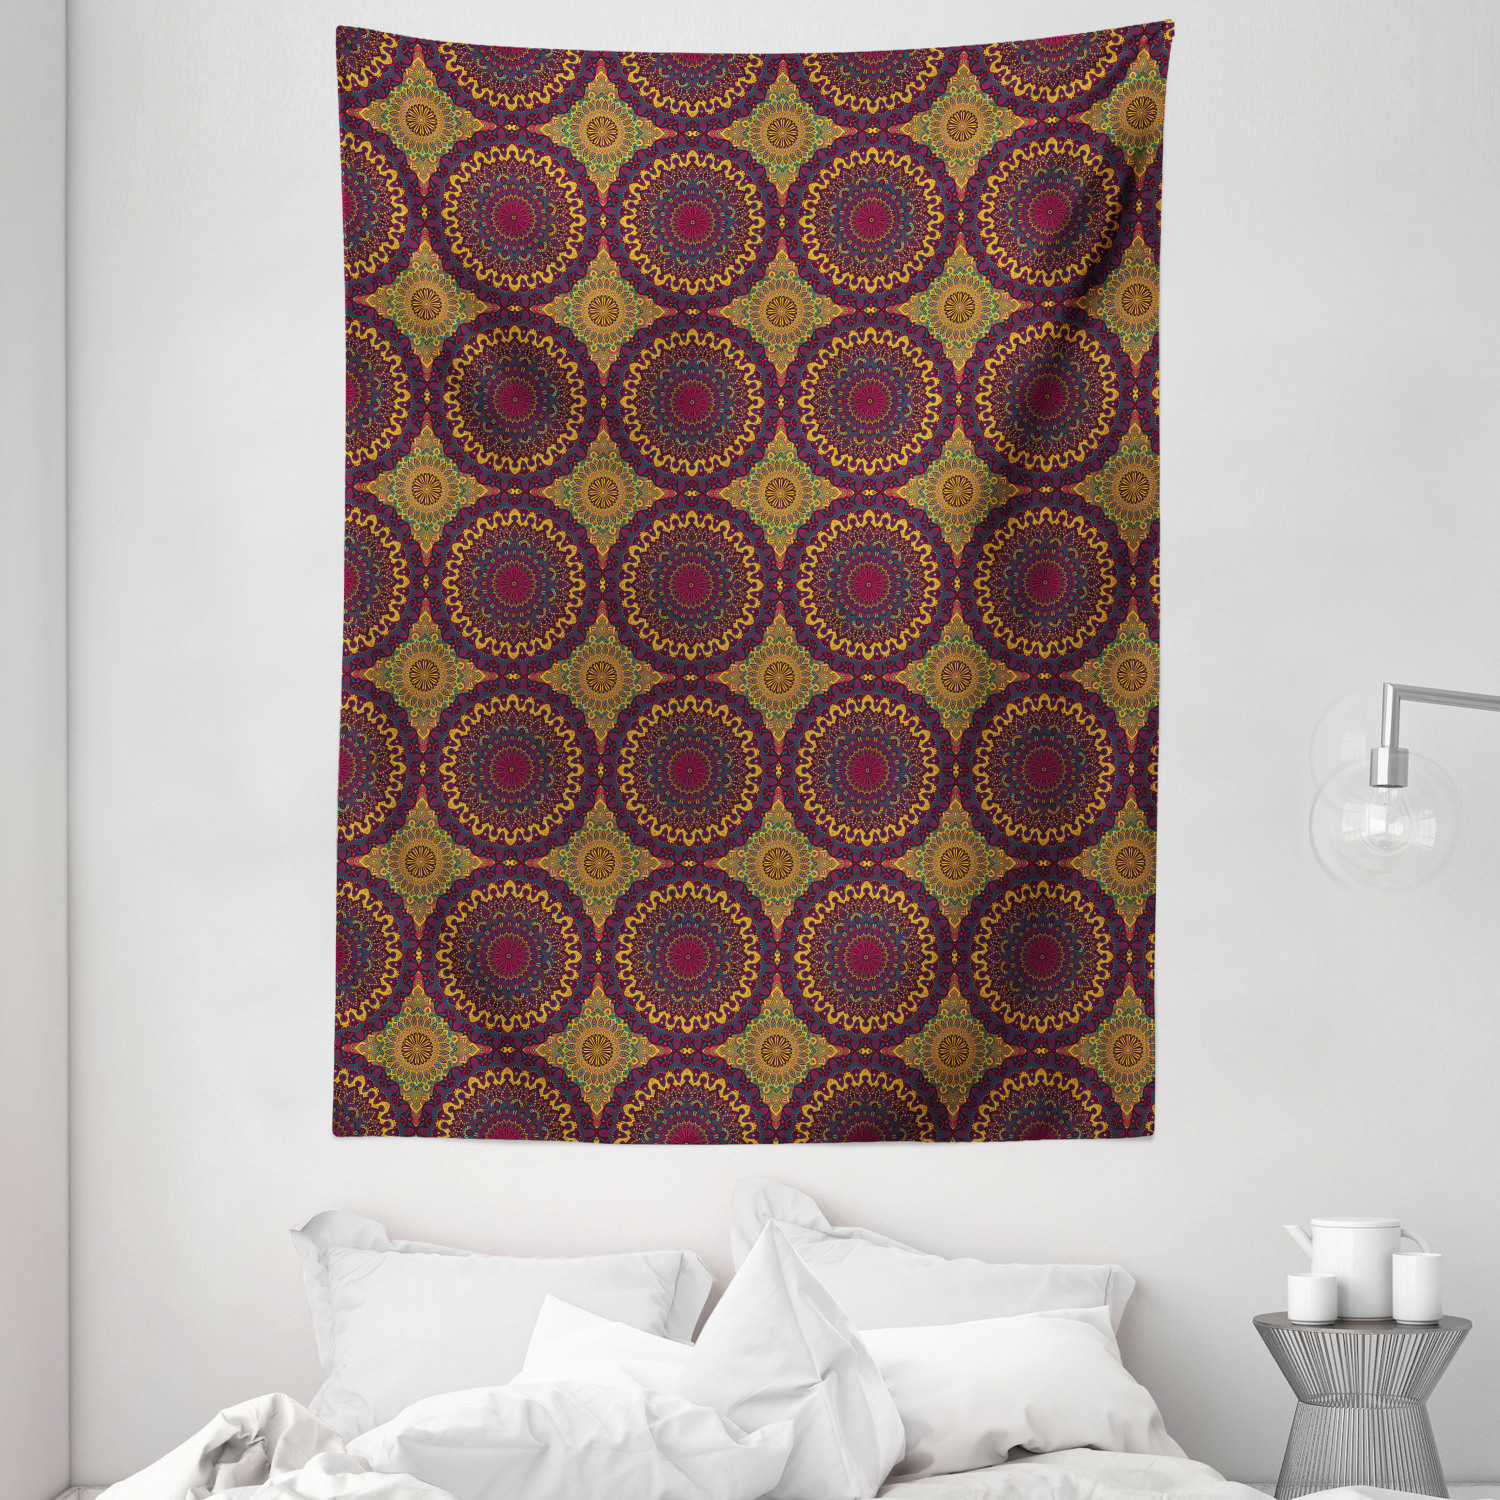 Ethnic Style Mandala Morocco Pattern Tapestry Wall Decor Hanging for Living Room 